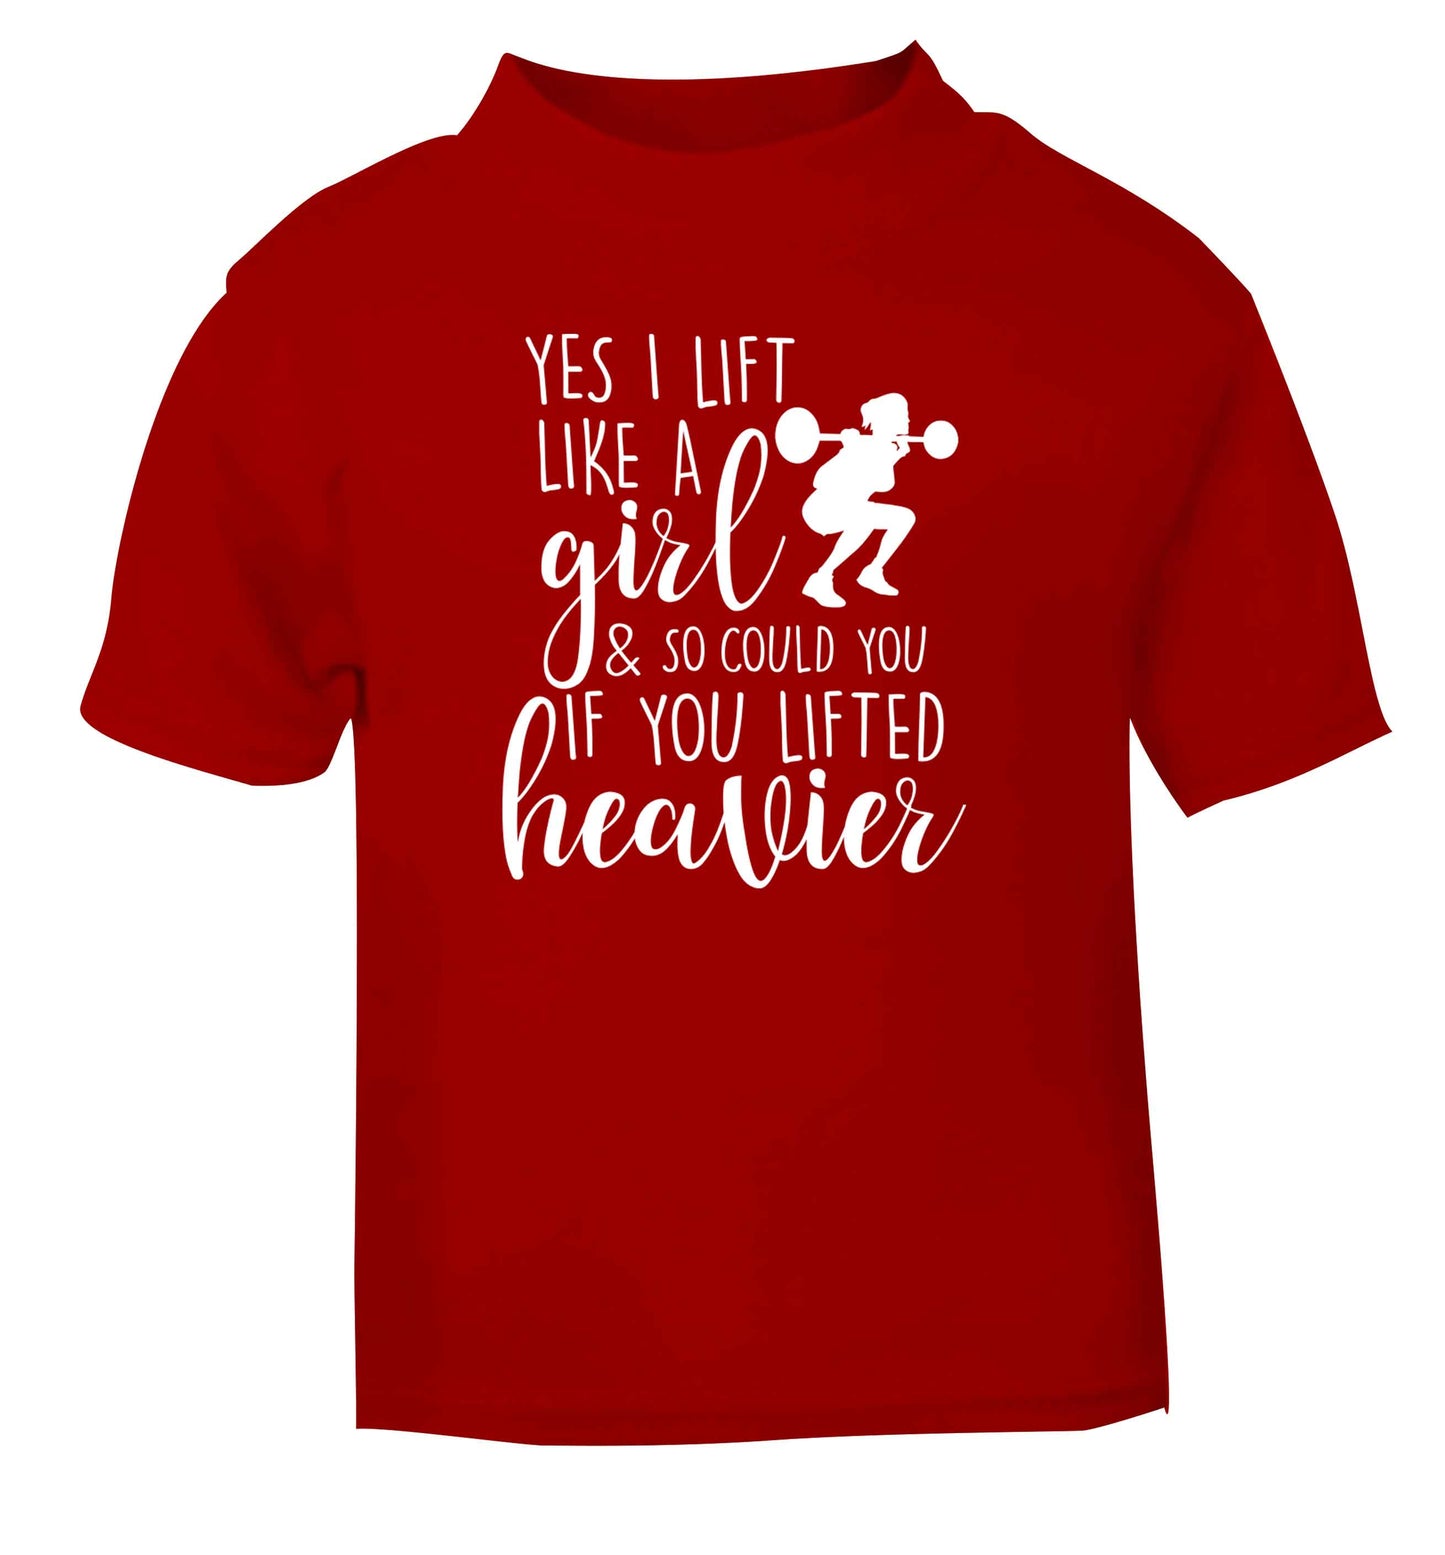 Yes I lift like a girl and so could you if you lifted heavier red Baby Toddler Tshirt 2 Years